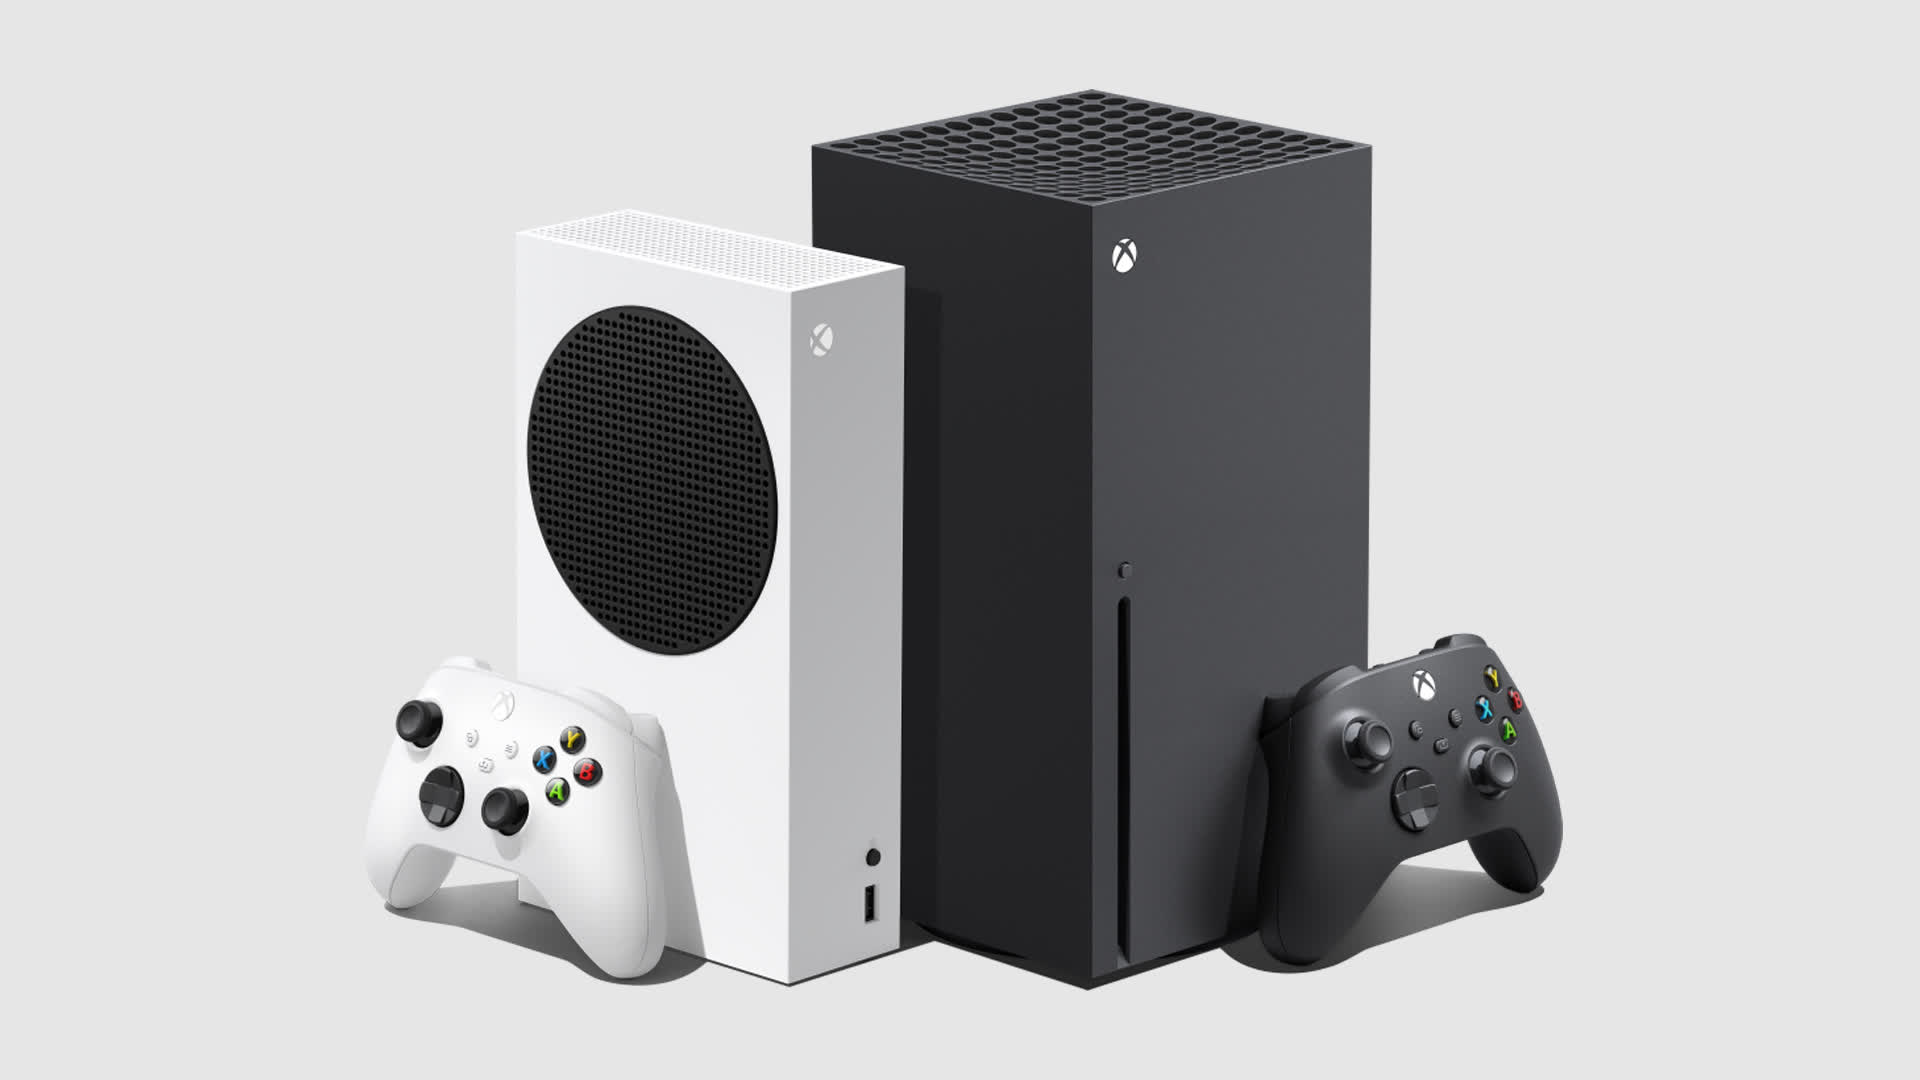 Xbox Series X|S external storage details confirmed: 128GB minimum and USB 3.0 required